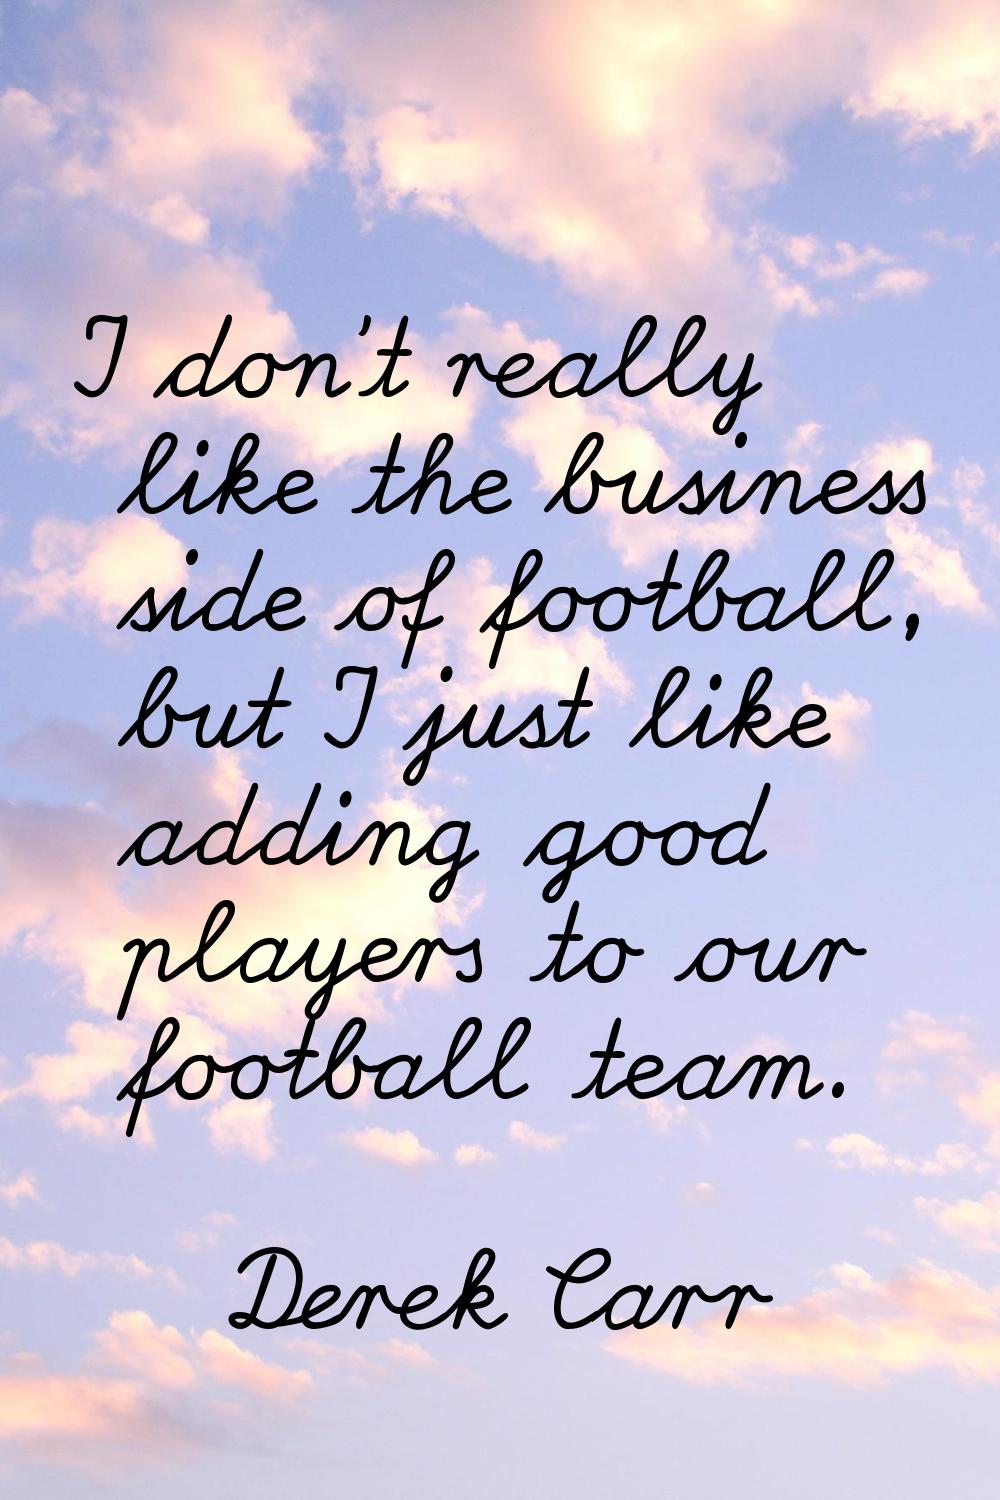 I don't really like the business side of football, but I just like adding good players to our footb